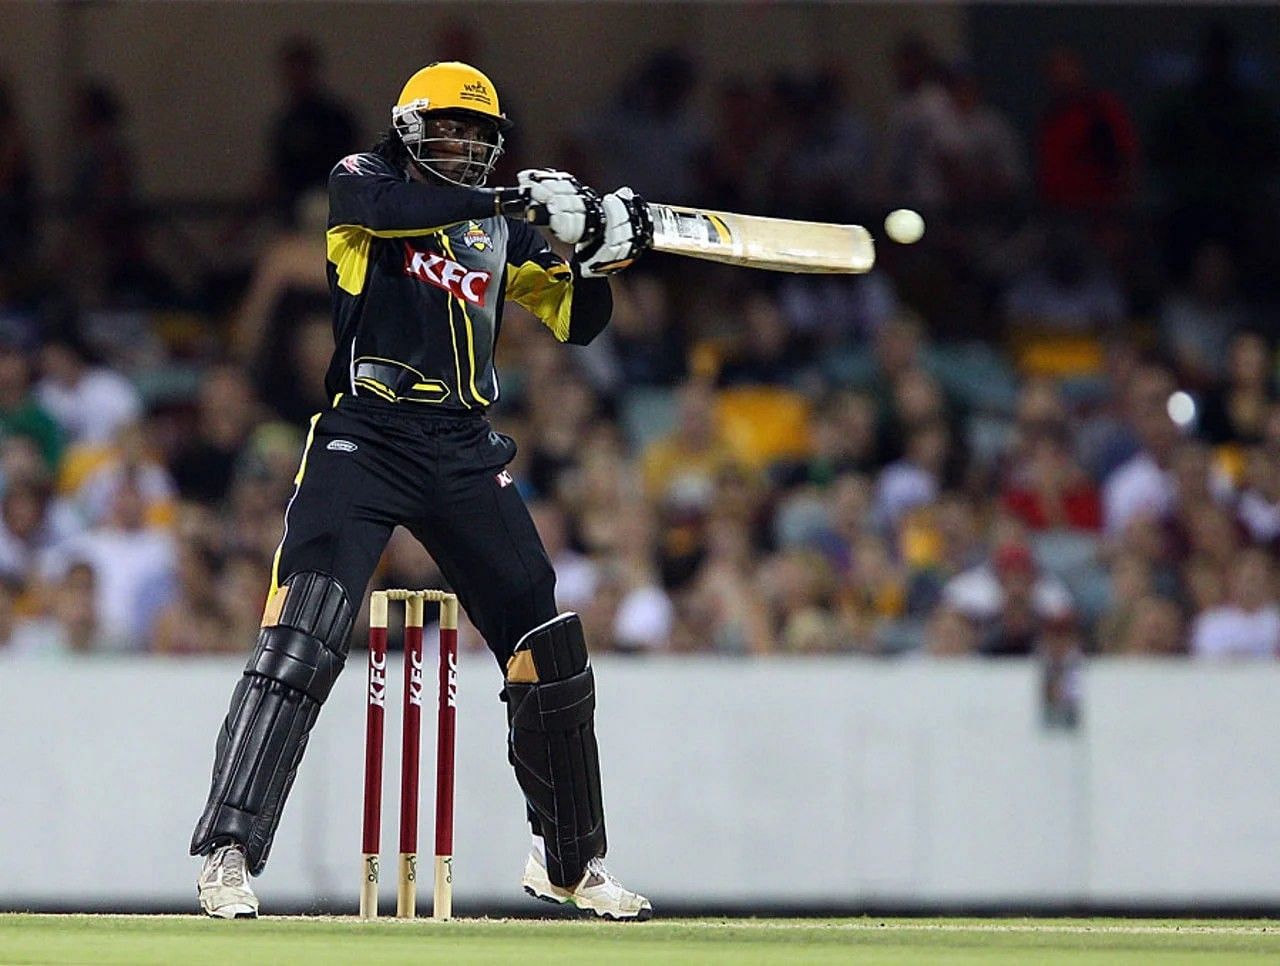 Chris Gayle blasted 92 runs vs Queensland in BBL 2010/11 [Getty Images]